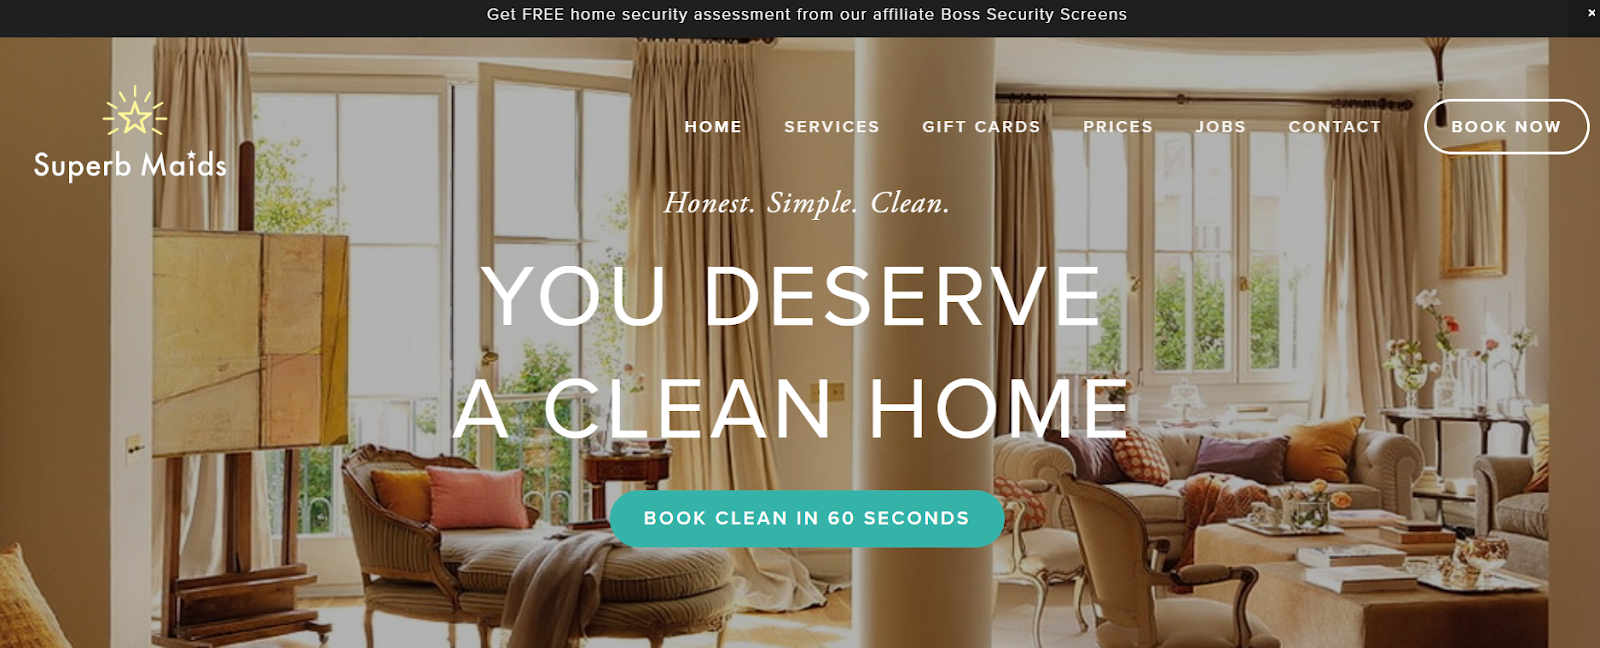 cleaning company website, Superb Maids